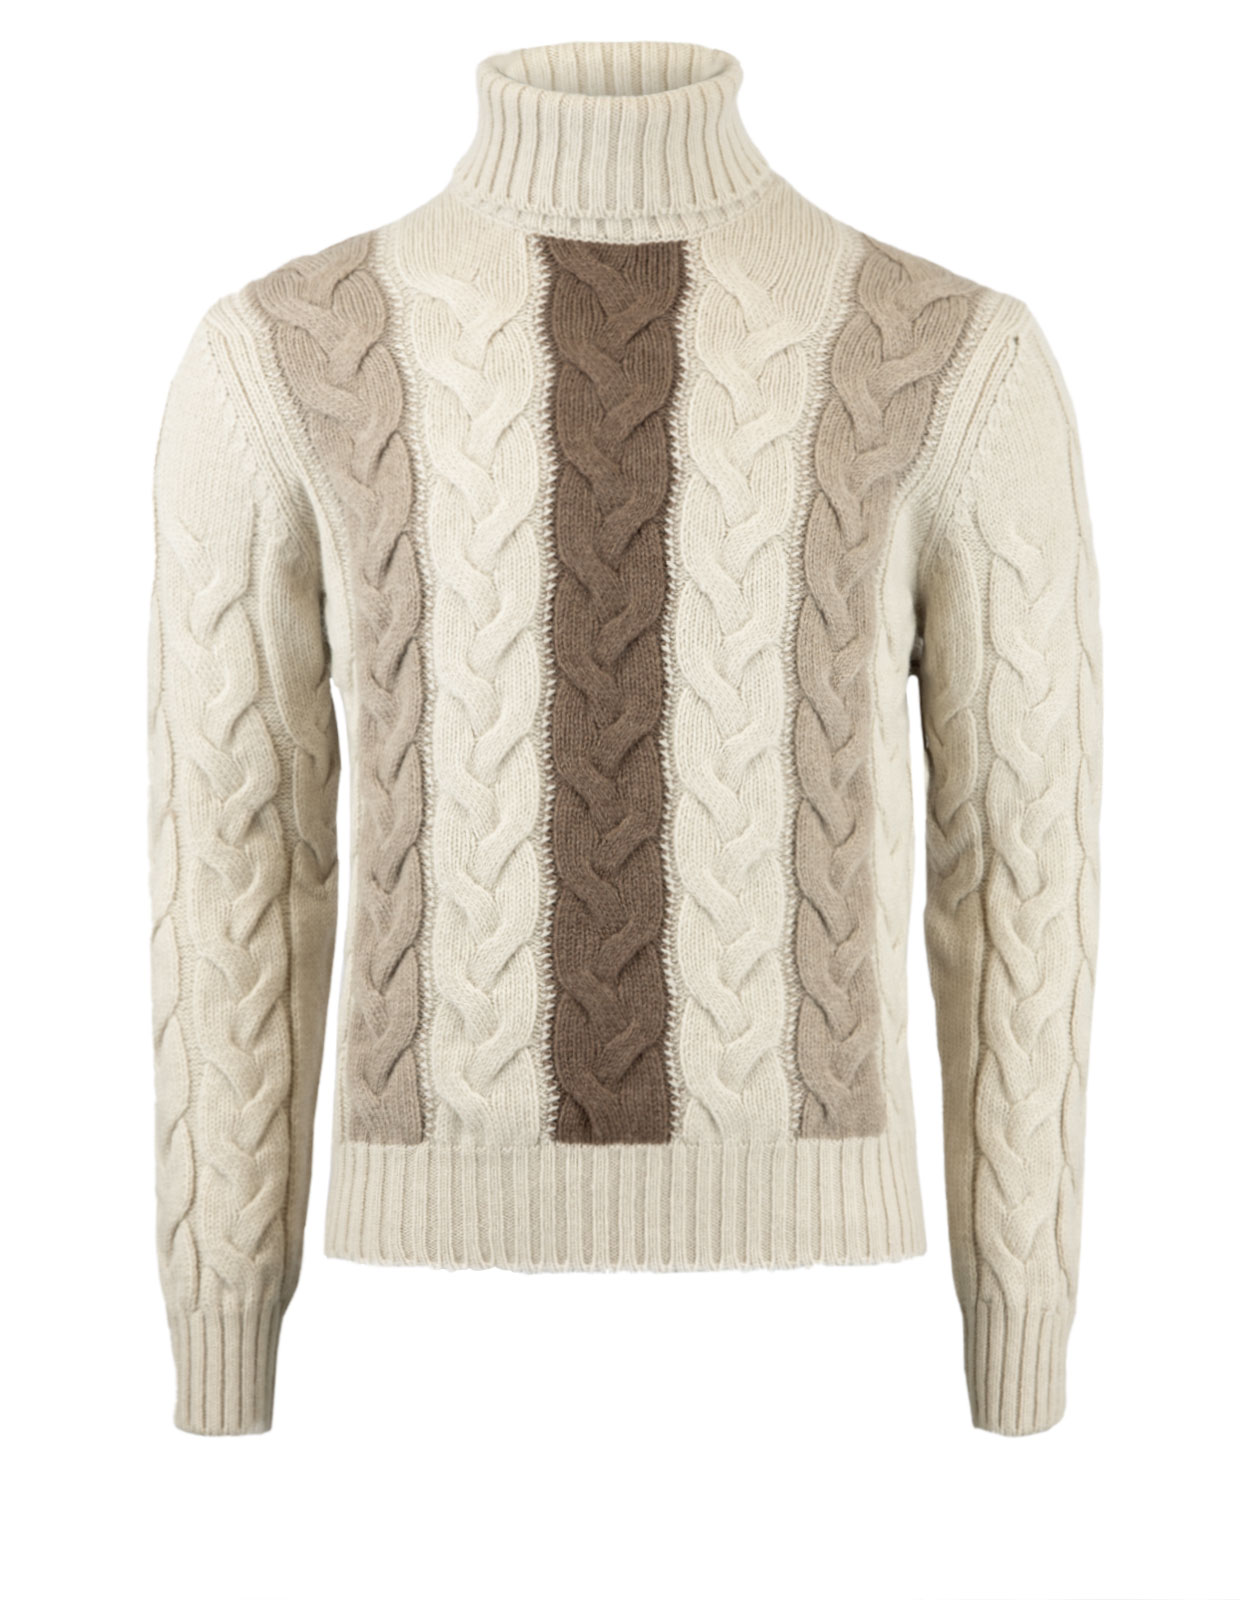 Roll Neck Cable Knit Wool Offwhite/Brown